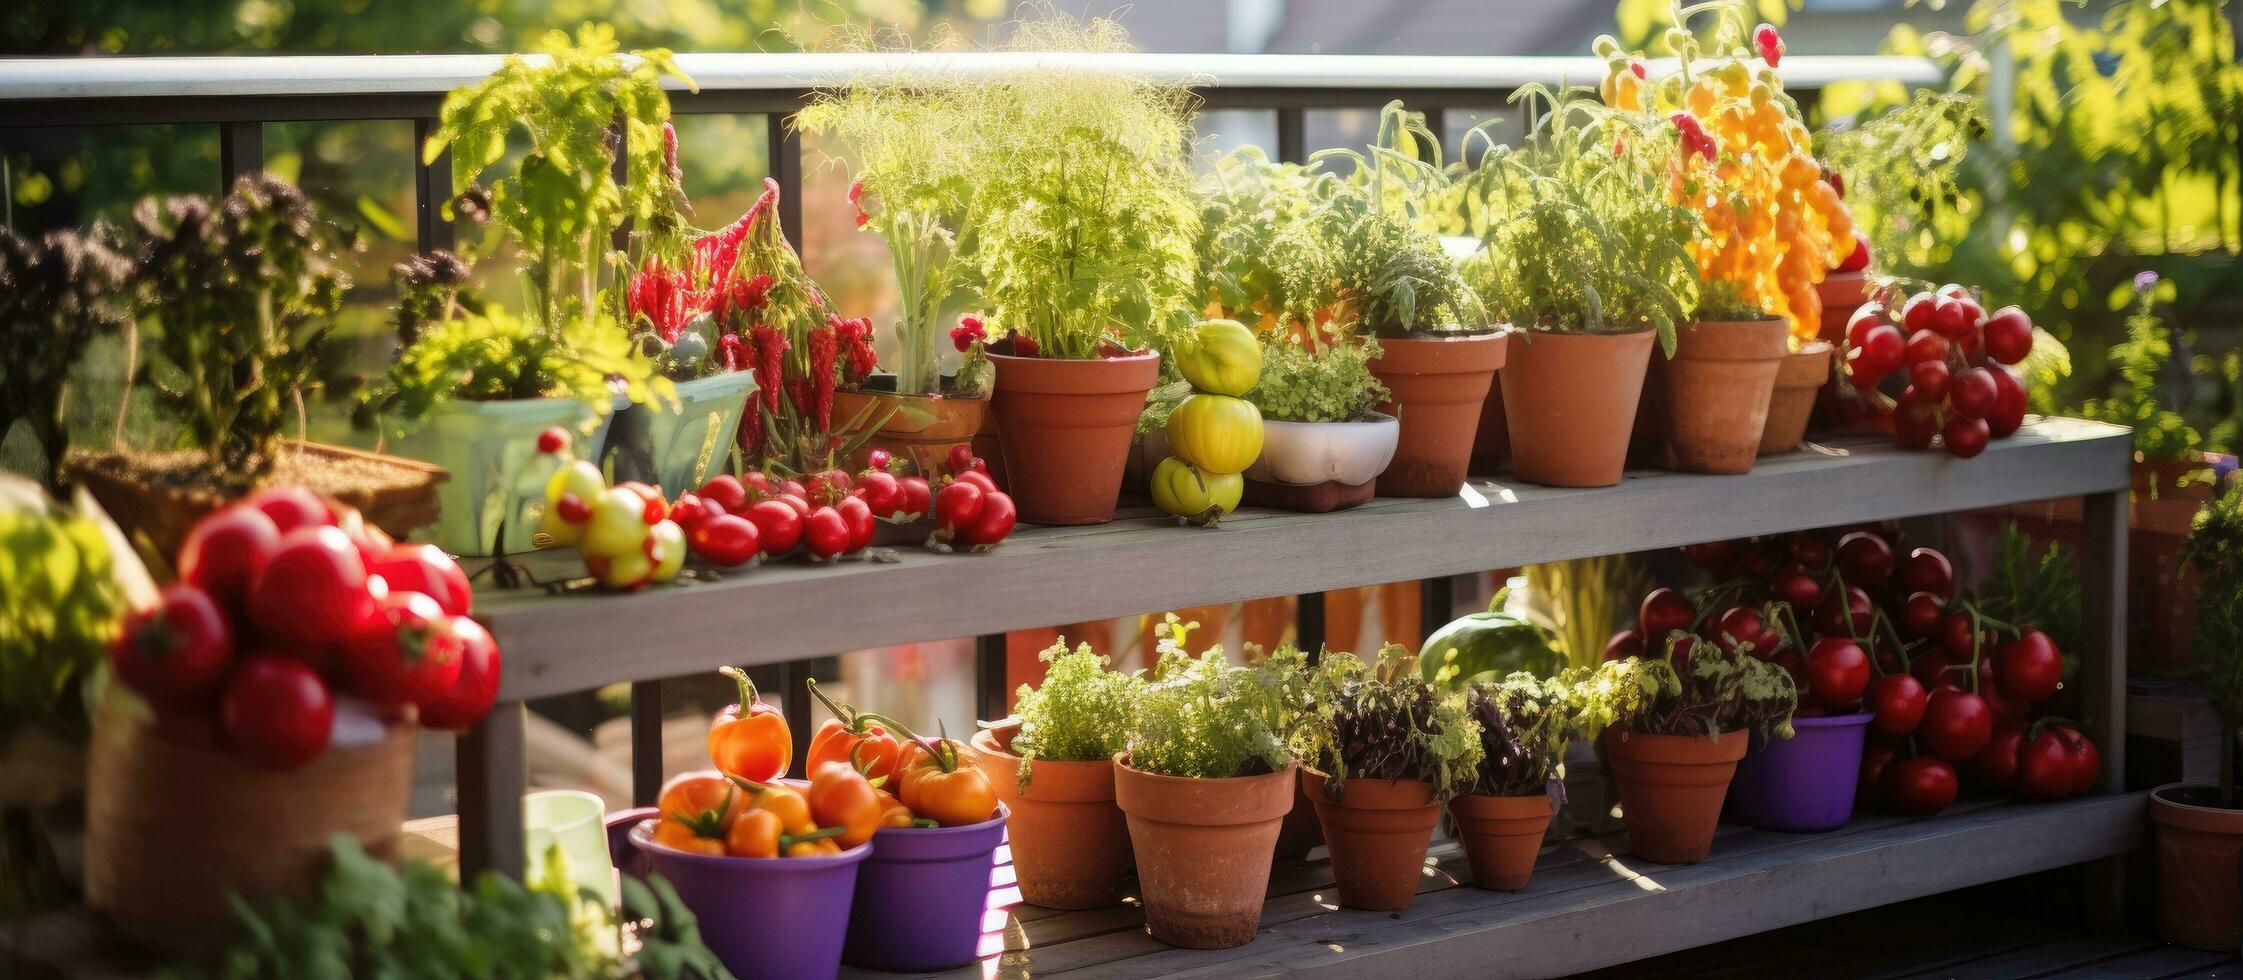 A balcony with various potted plants like cherry tomatoes lavender leeks celery and strawberries photo